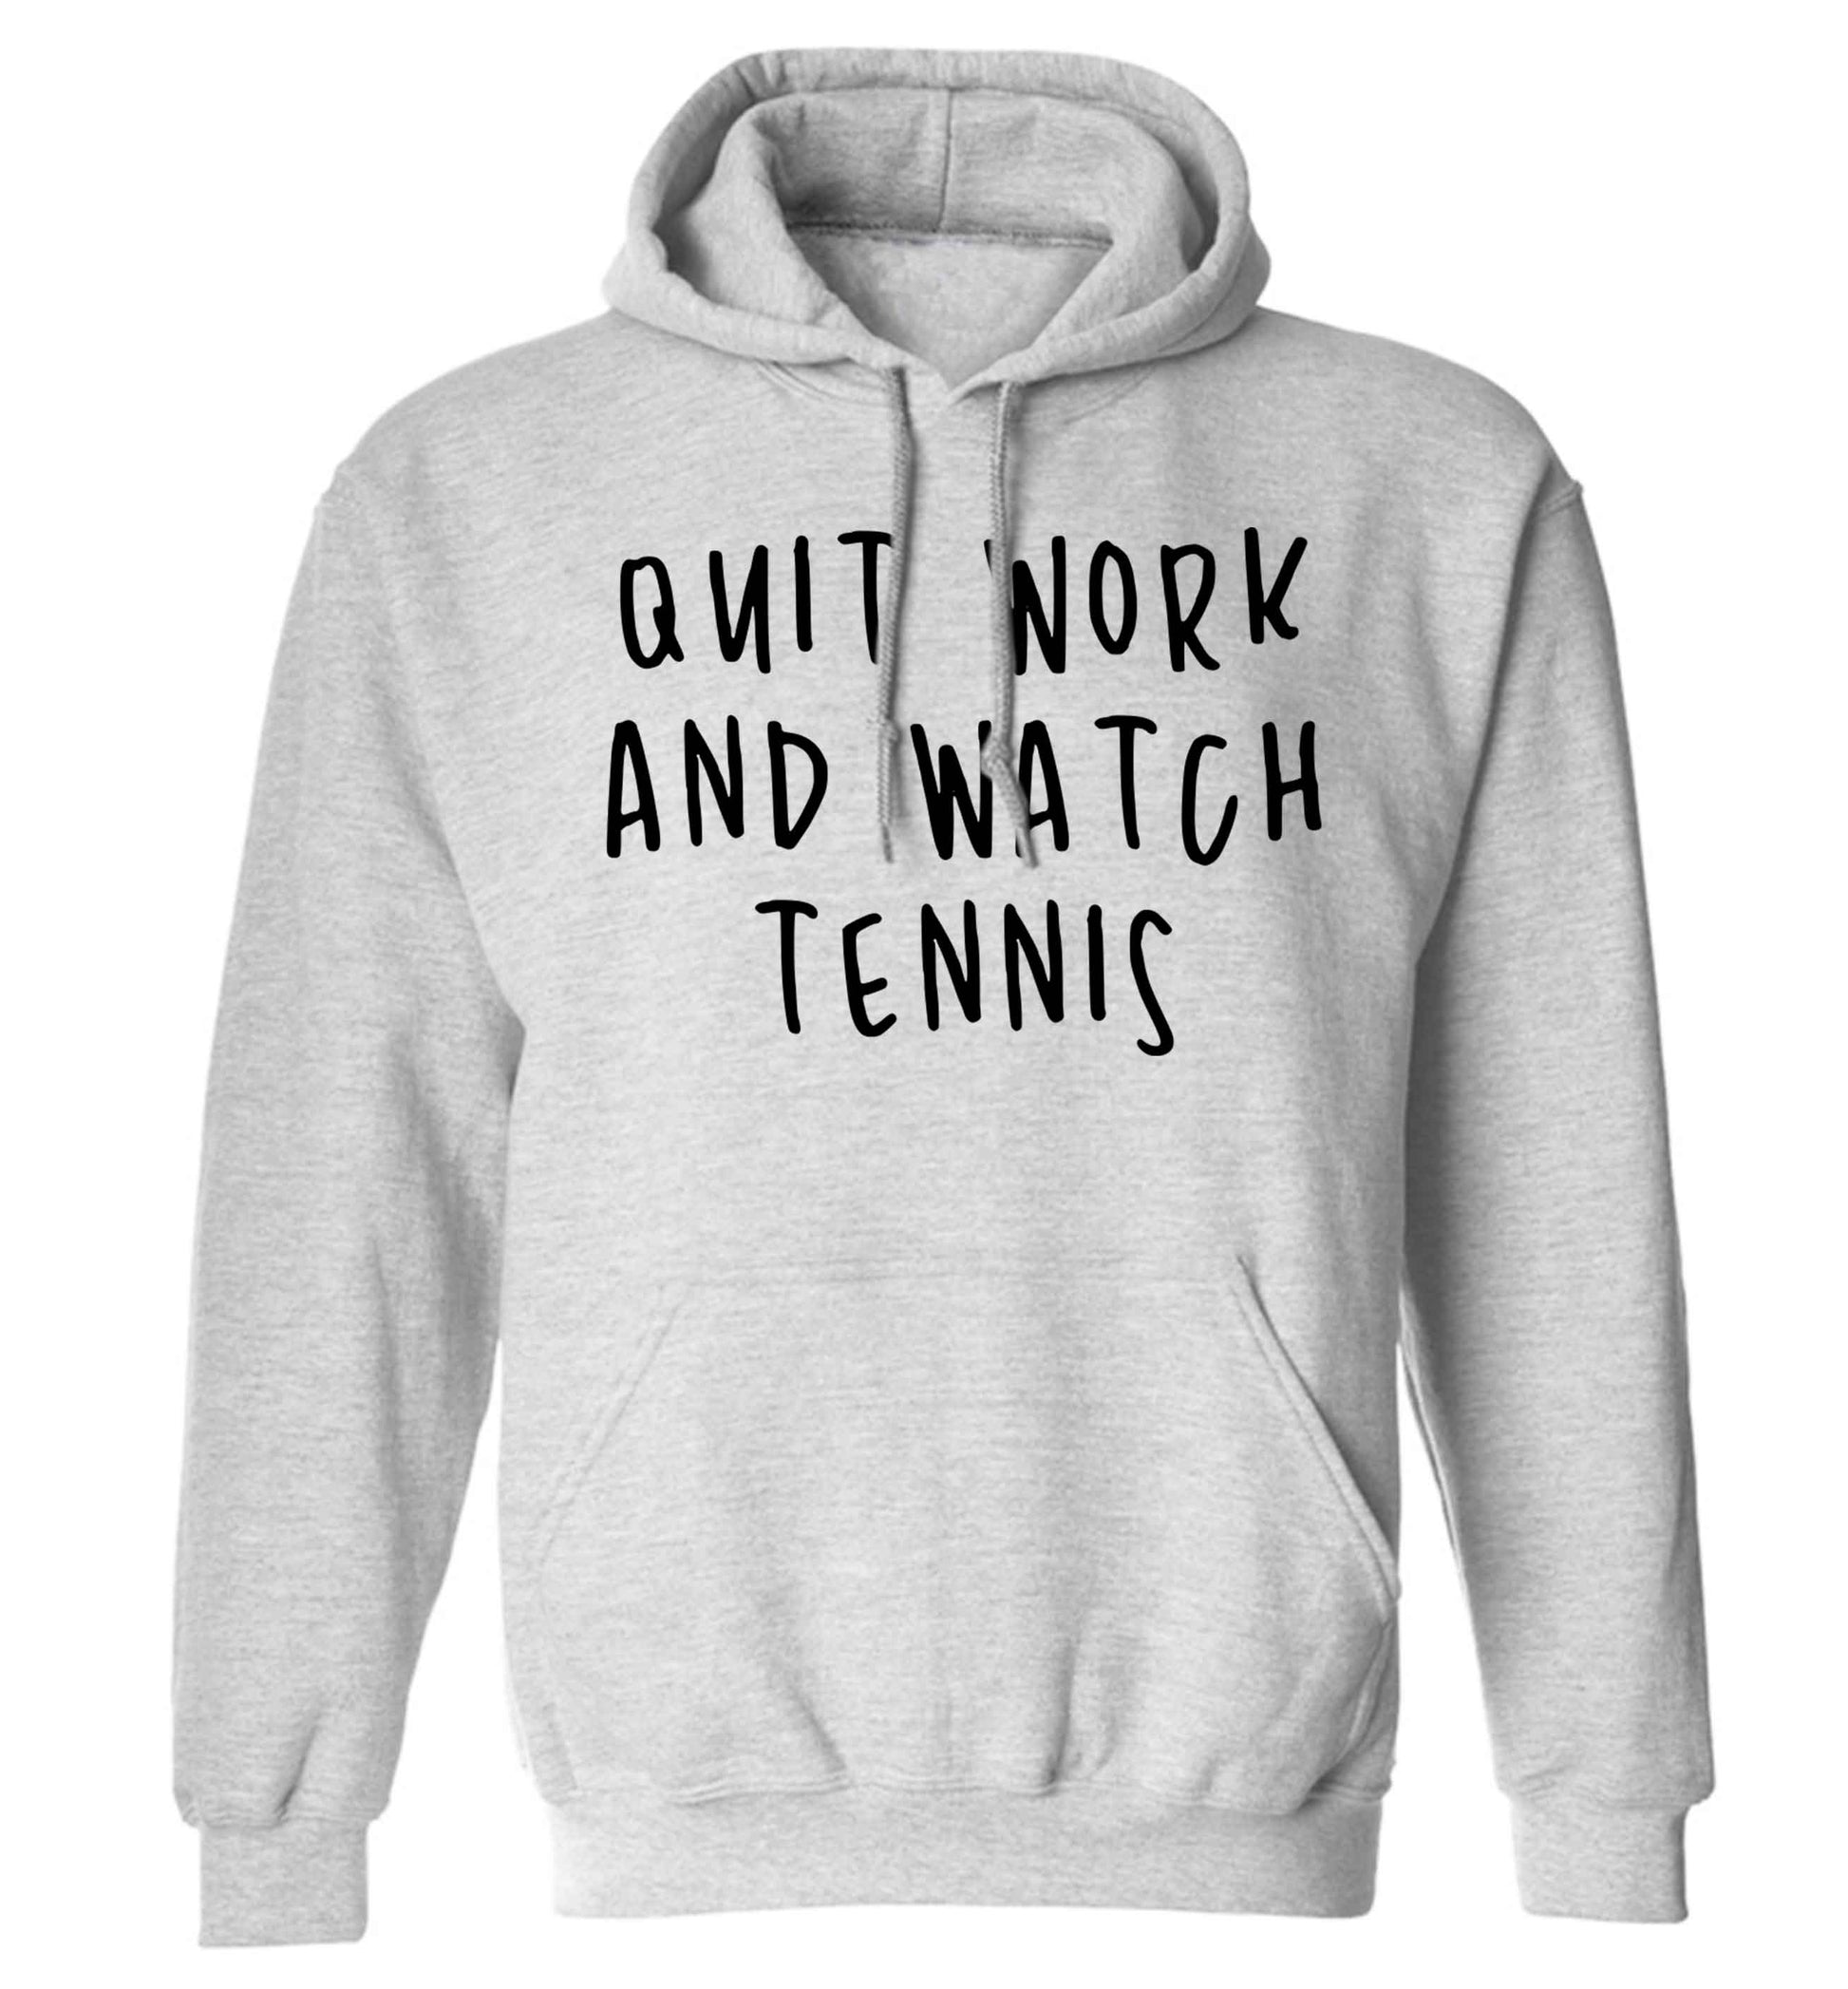 Quit work and watch tennis adults unisex grey hoodie 2XL